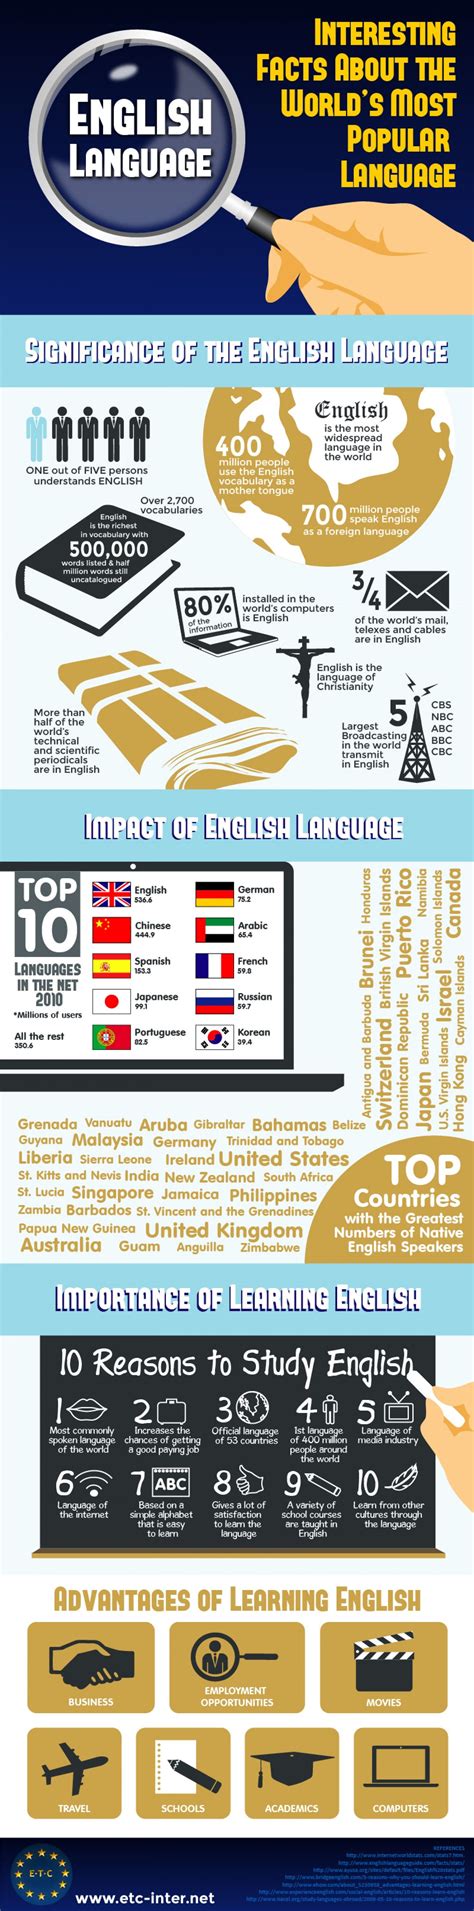 English Language Interesting Facts About The Worlds Most Popular